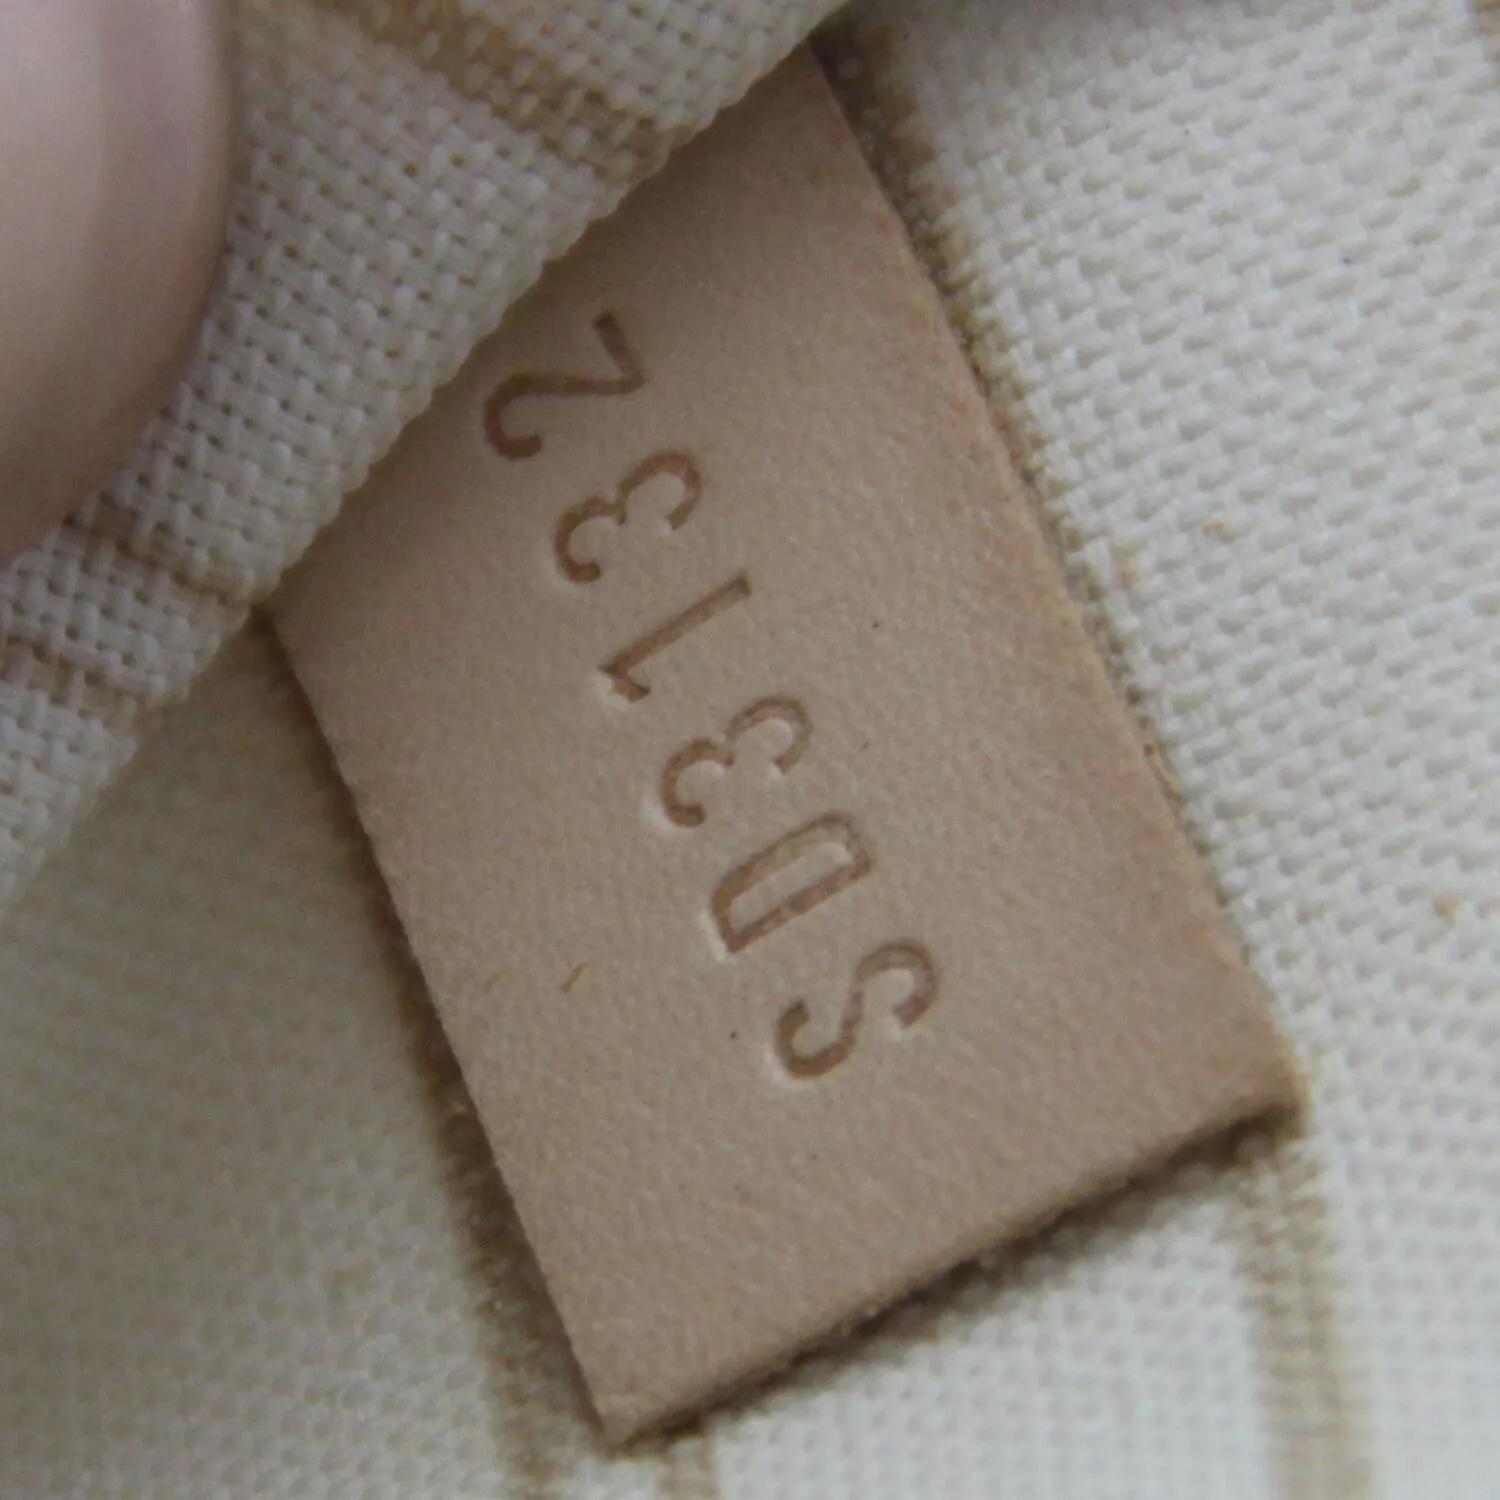 A Quick Guide to Authentic Louis Vuitton Date Codes